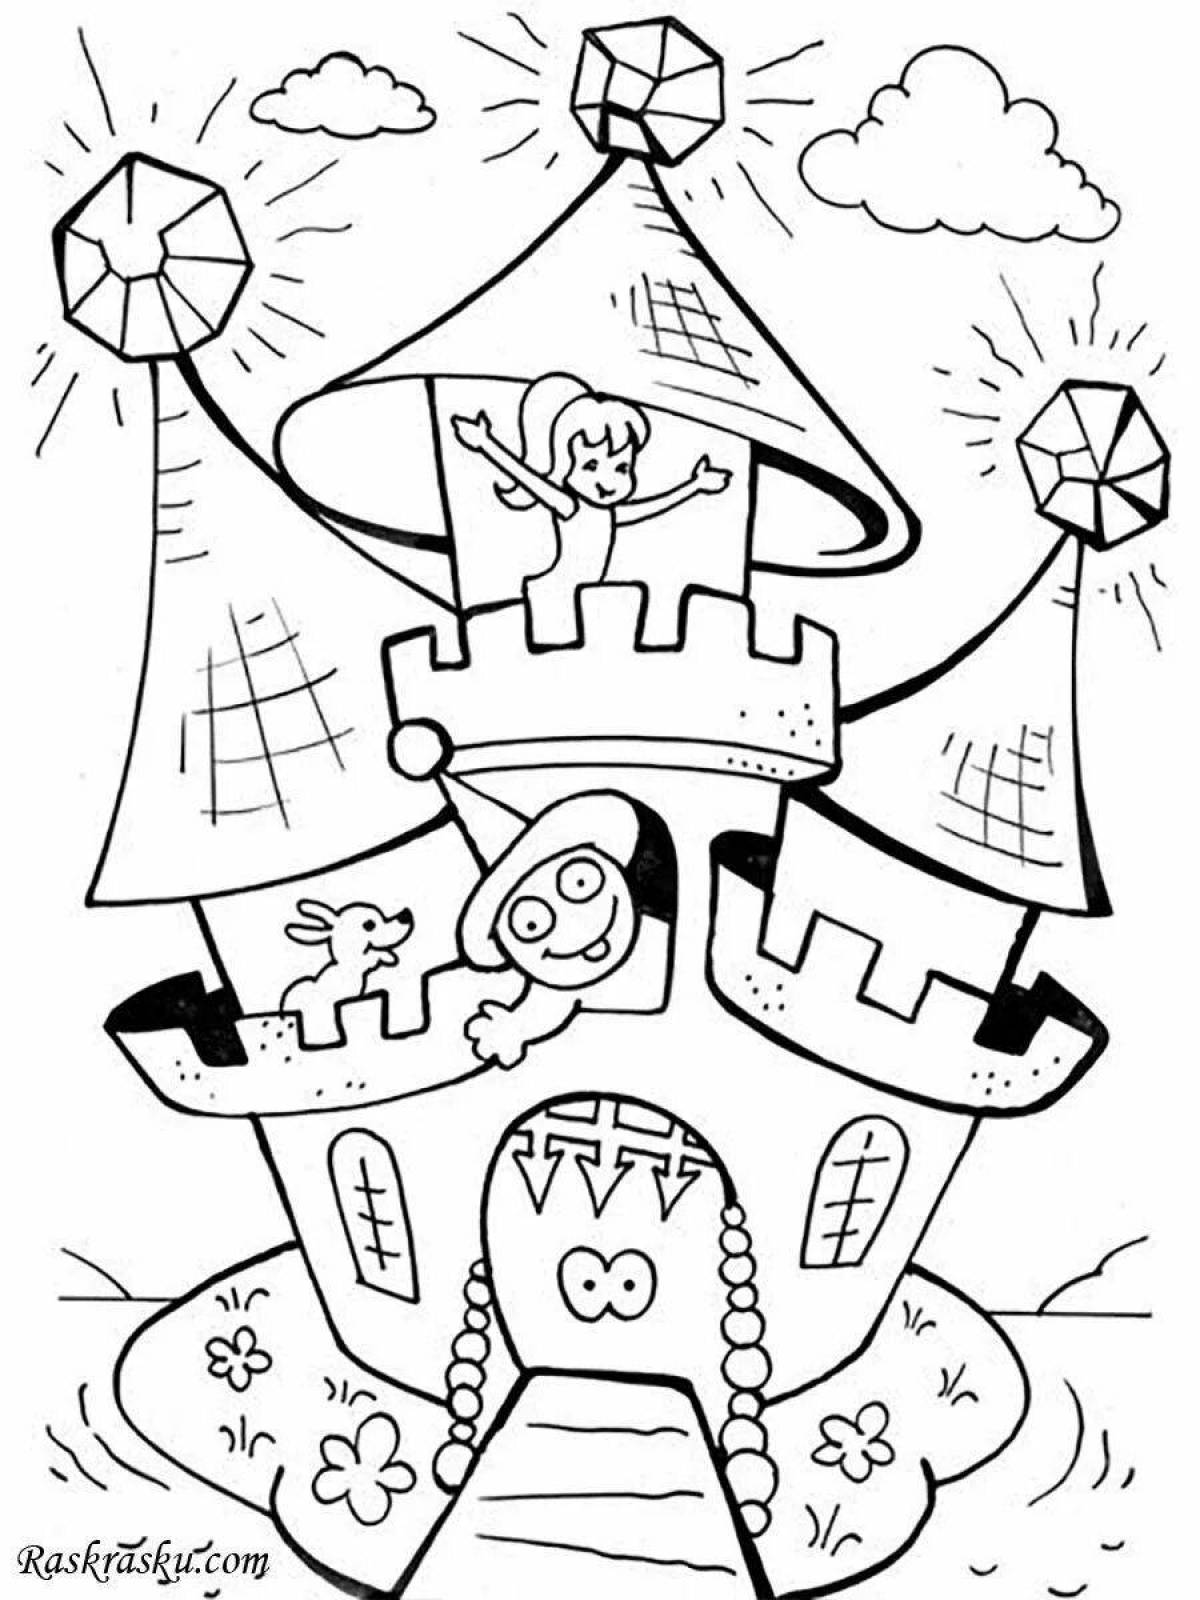 Coloring book cheerful children's world house